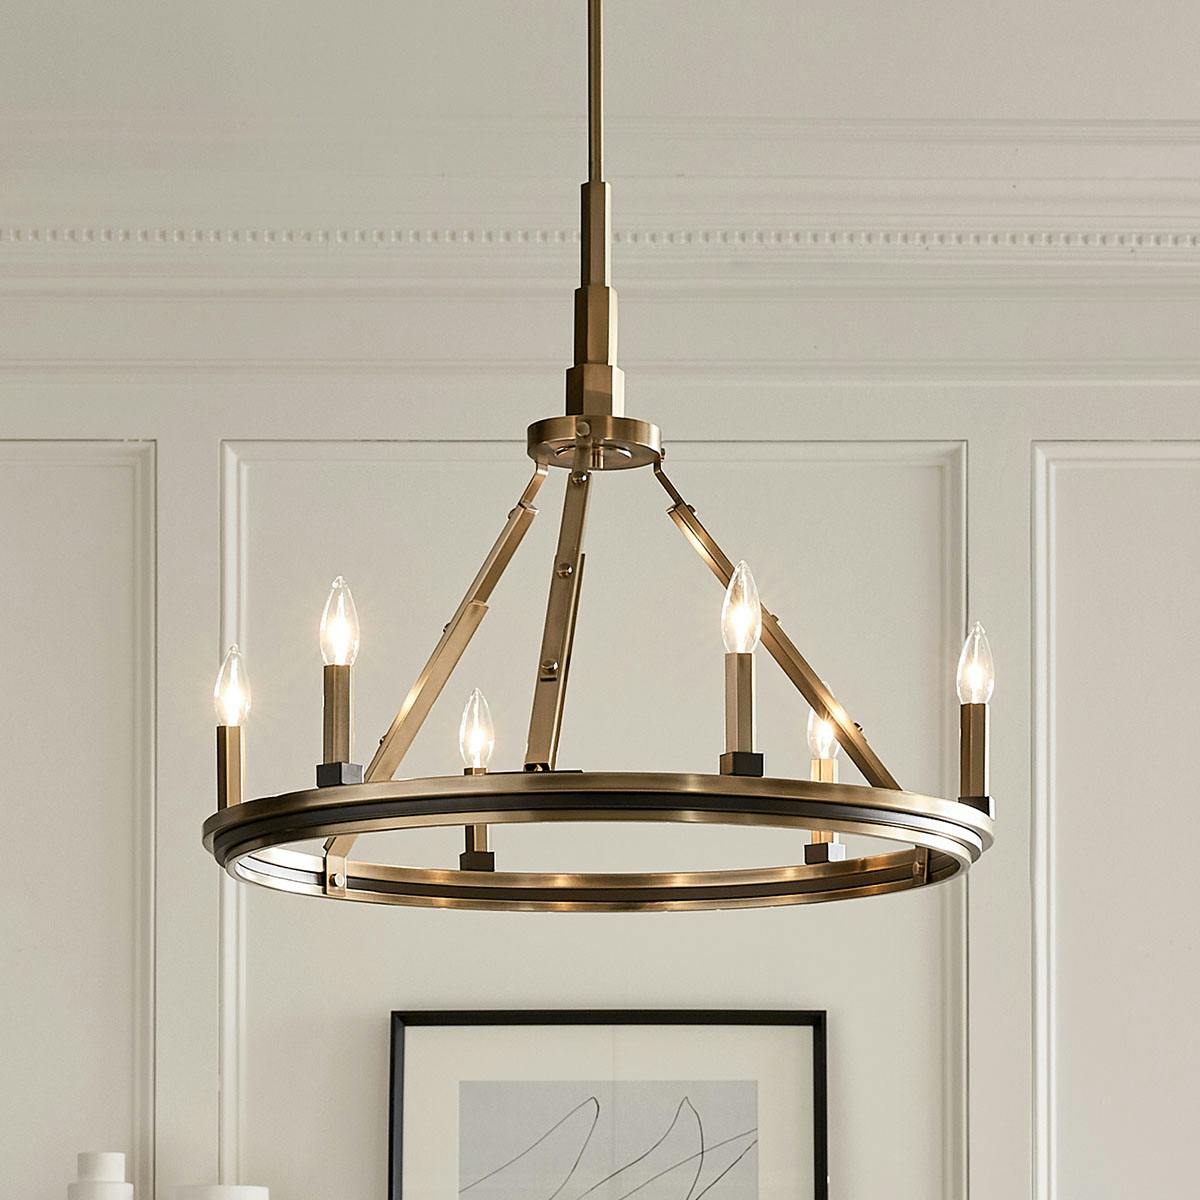 Day time Dining Room image featuring Emmala chandelier 52420BNB